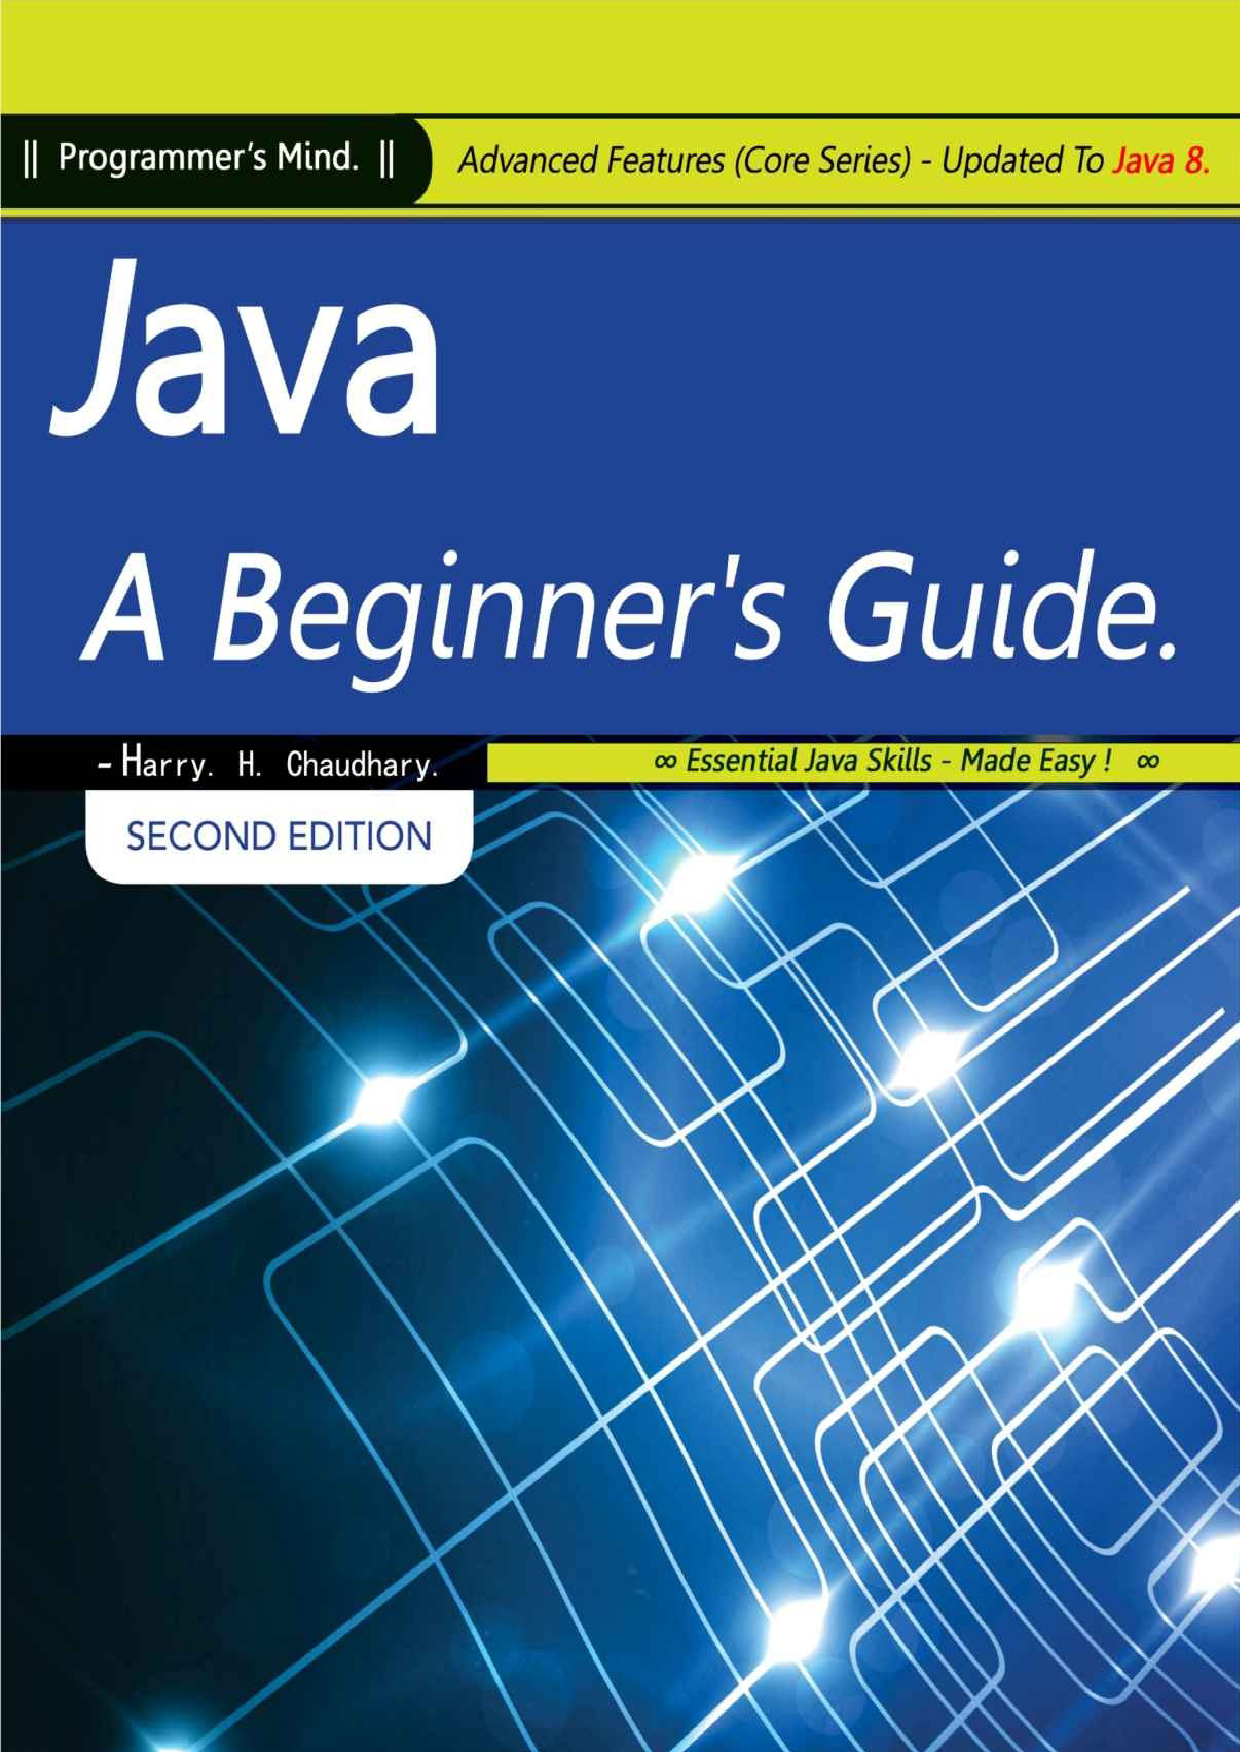 Java, A Beginner's Guide Advanced Features Core Series Updated ...